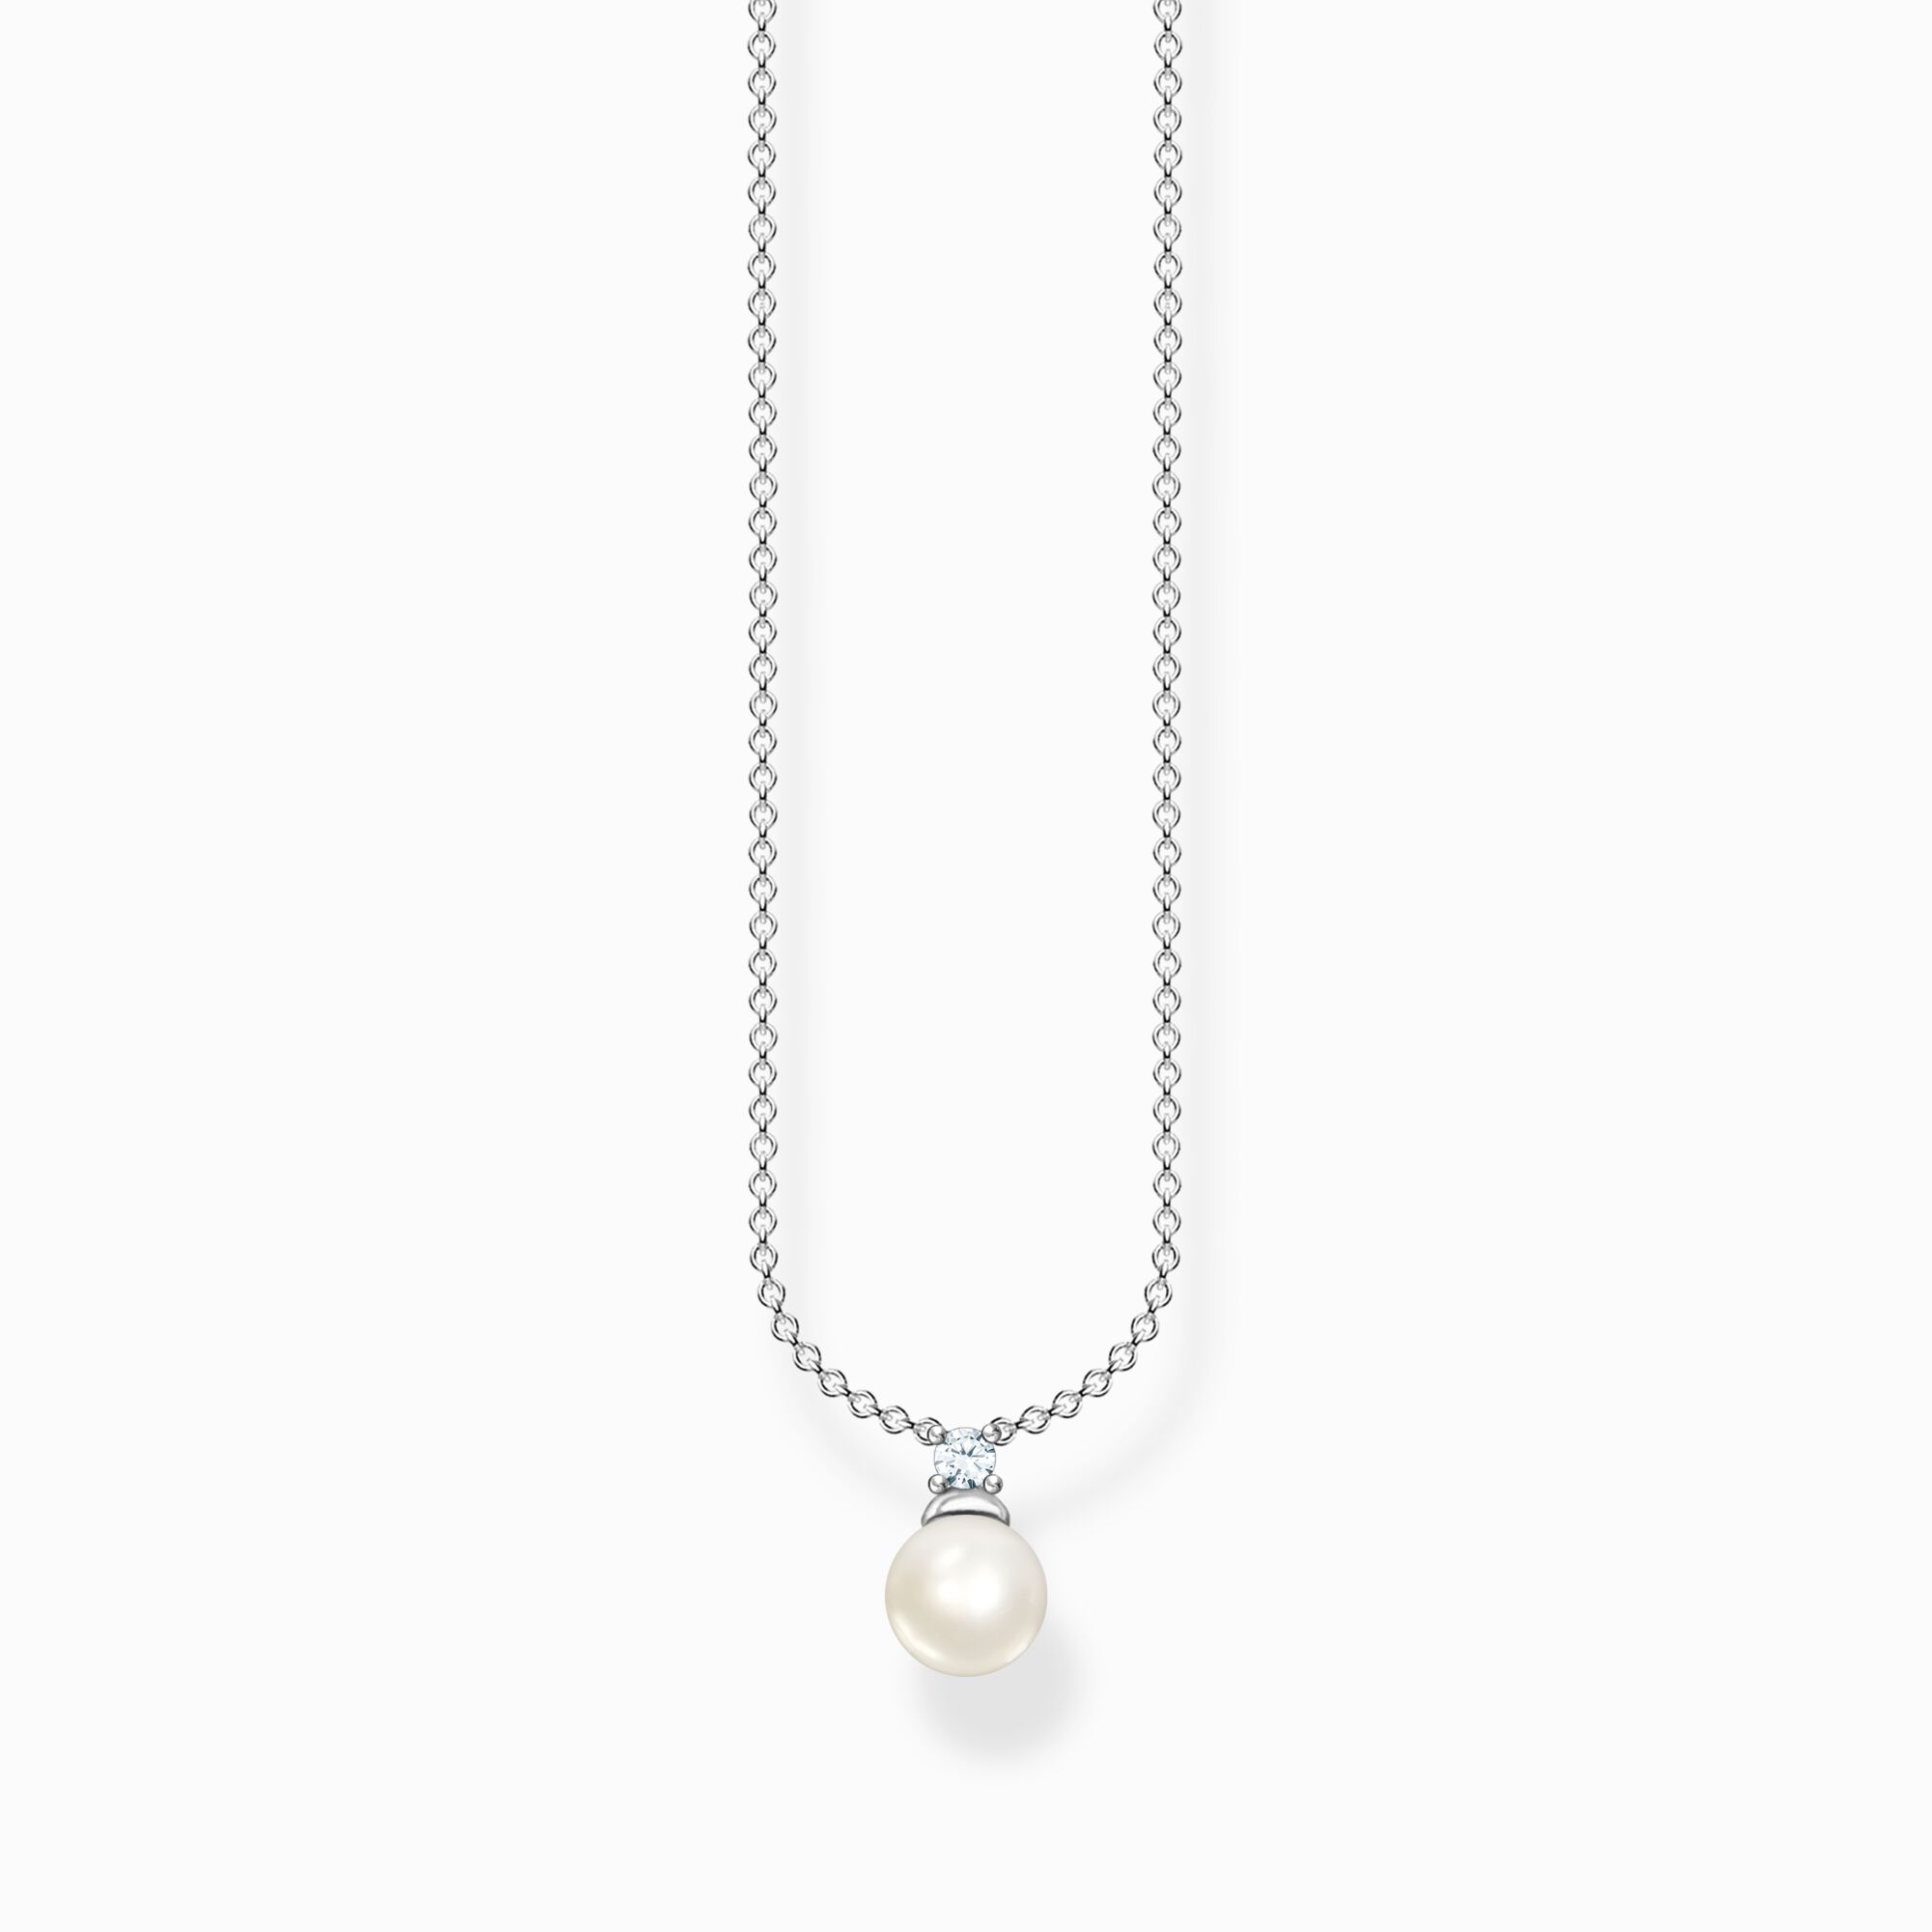 Necklace pearl silver from the Charming Collection collection in the THOMAS SABO online store